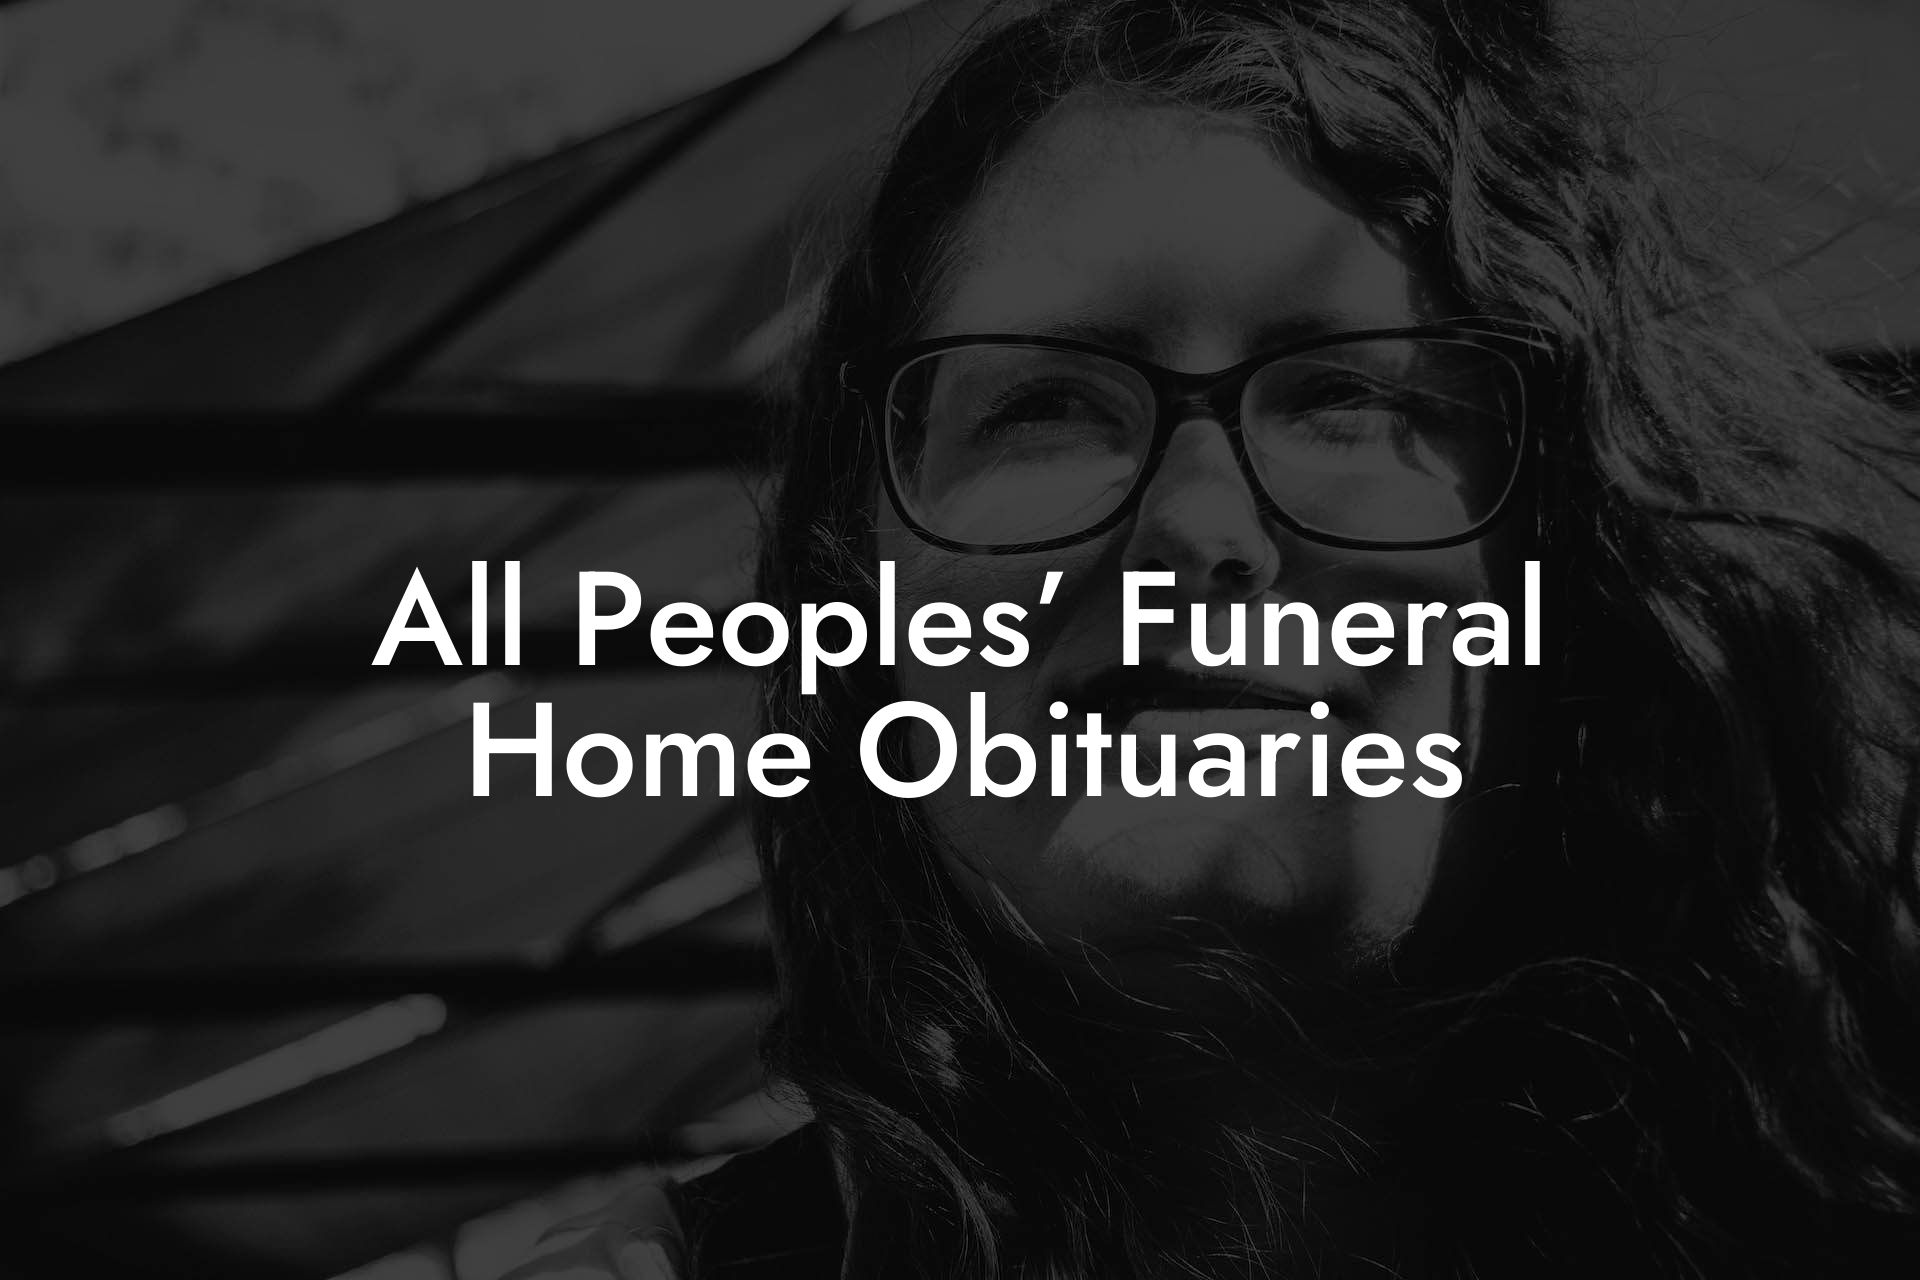 All Peoples’ Funeral Home Obituaries